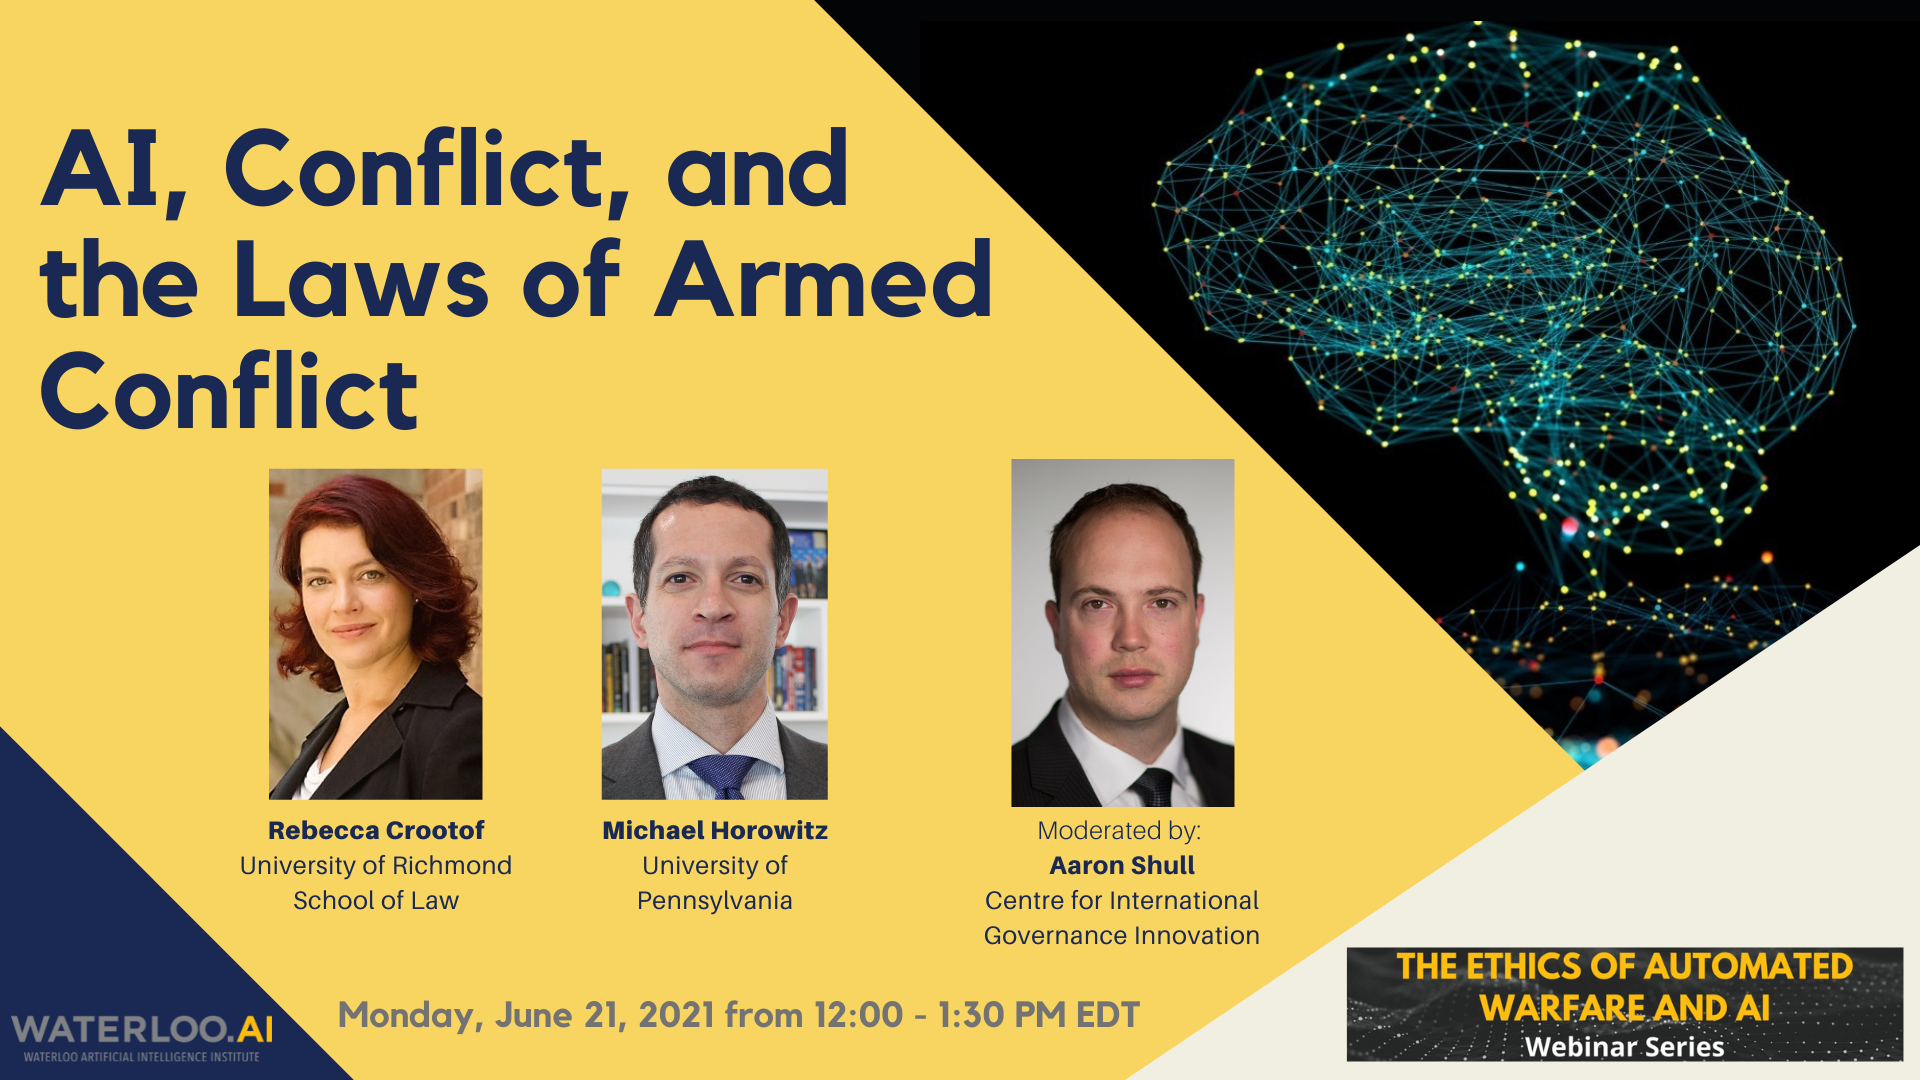 AI, Conflict, and the Laws of Armed Conflict event poster